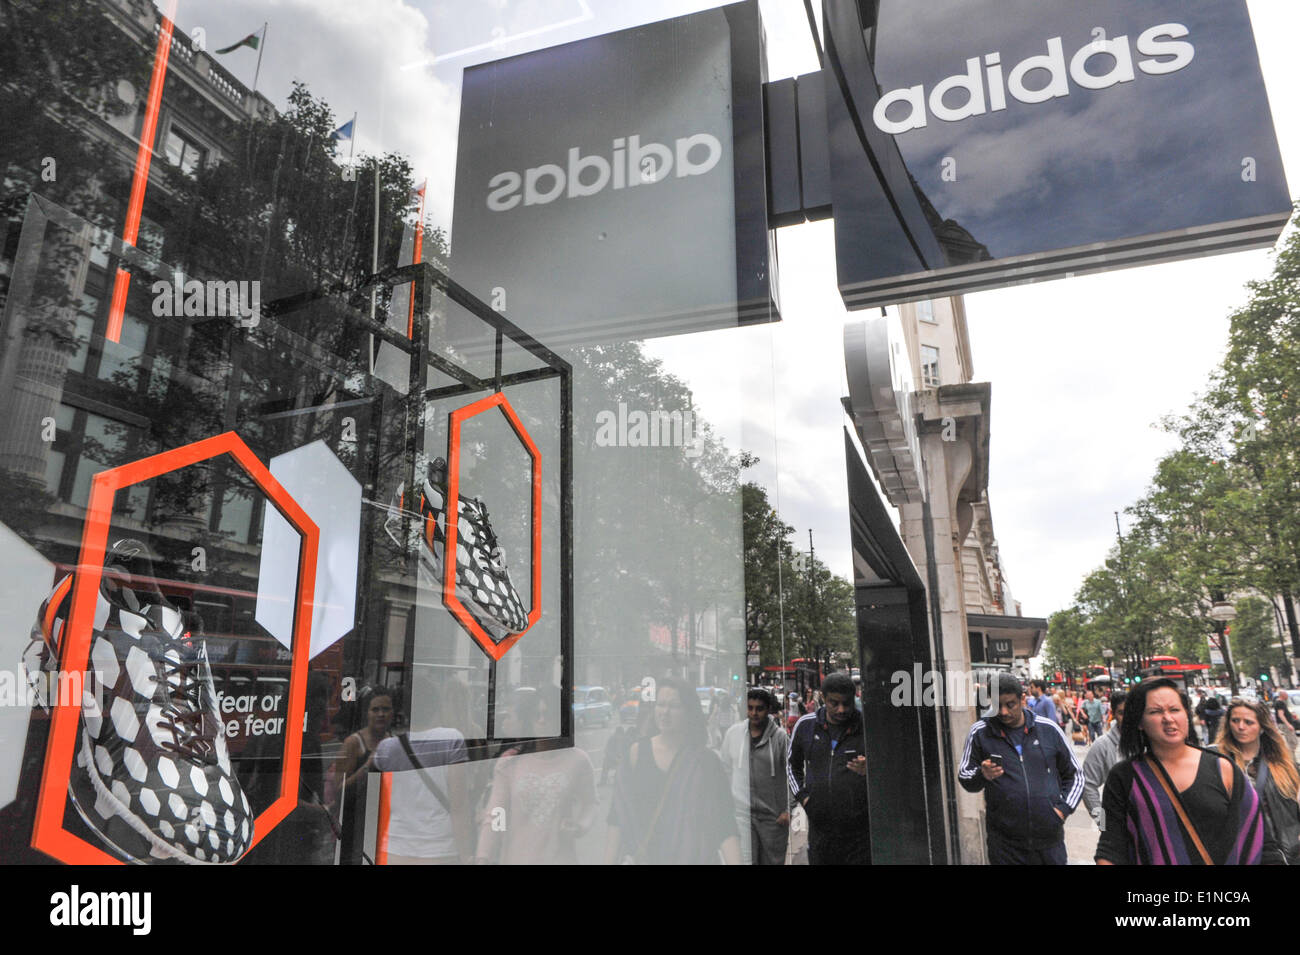 adidas stores in the world